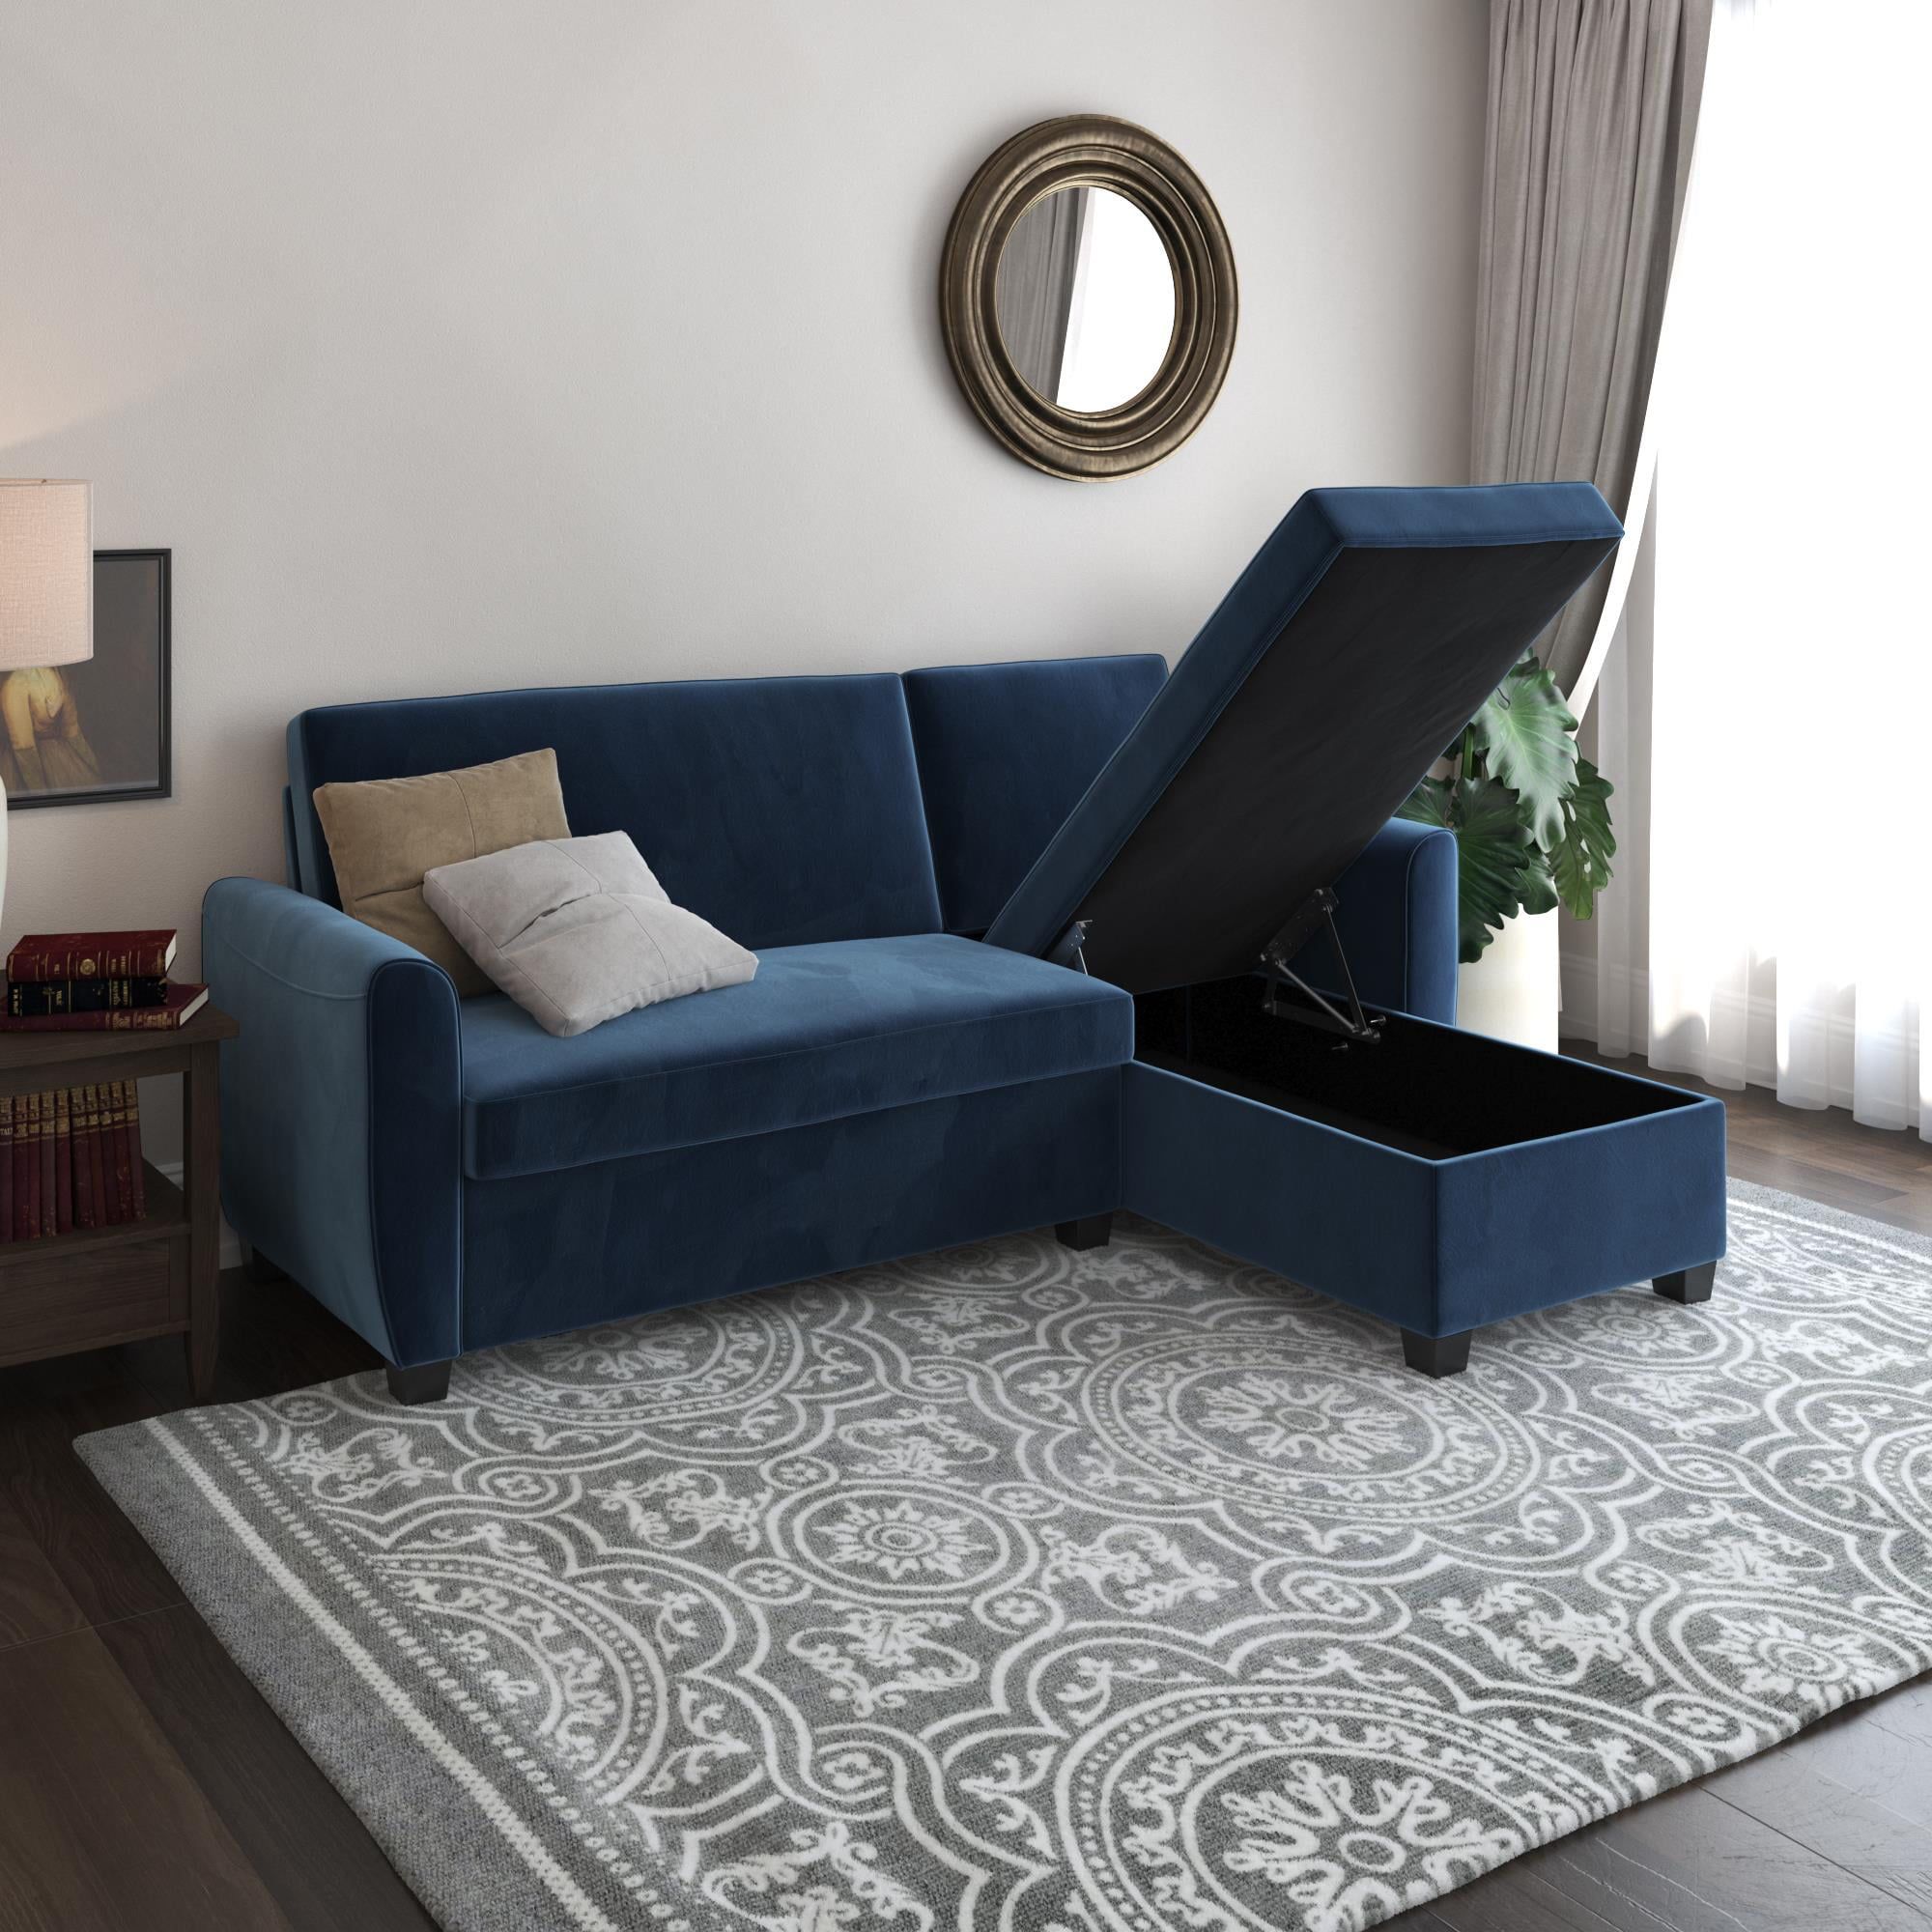 Dhp Noah Sectional Sofa Bed With Storage, Twin Frame, Dark Blue Velvet Pertaining To Modern Velvet Sofa Recliners With Storage (View 18 of 20)